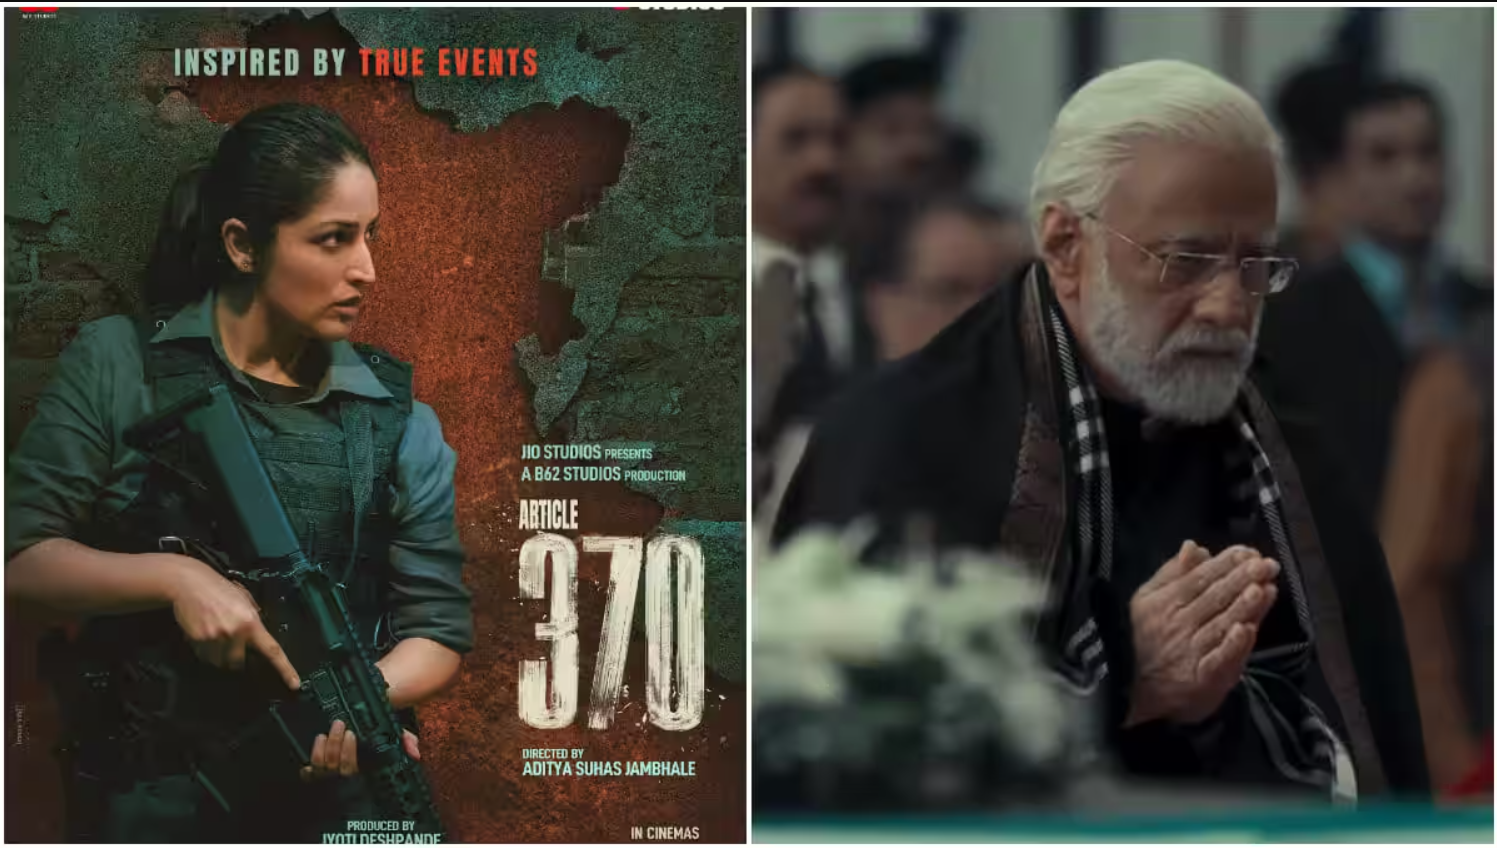 Article 370 Box Office Day 6: This Political Drama Film Earns Over Rs. 32 Crore In India